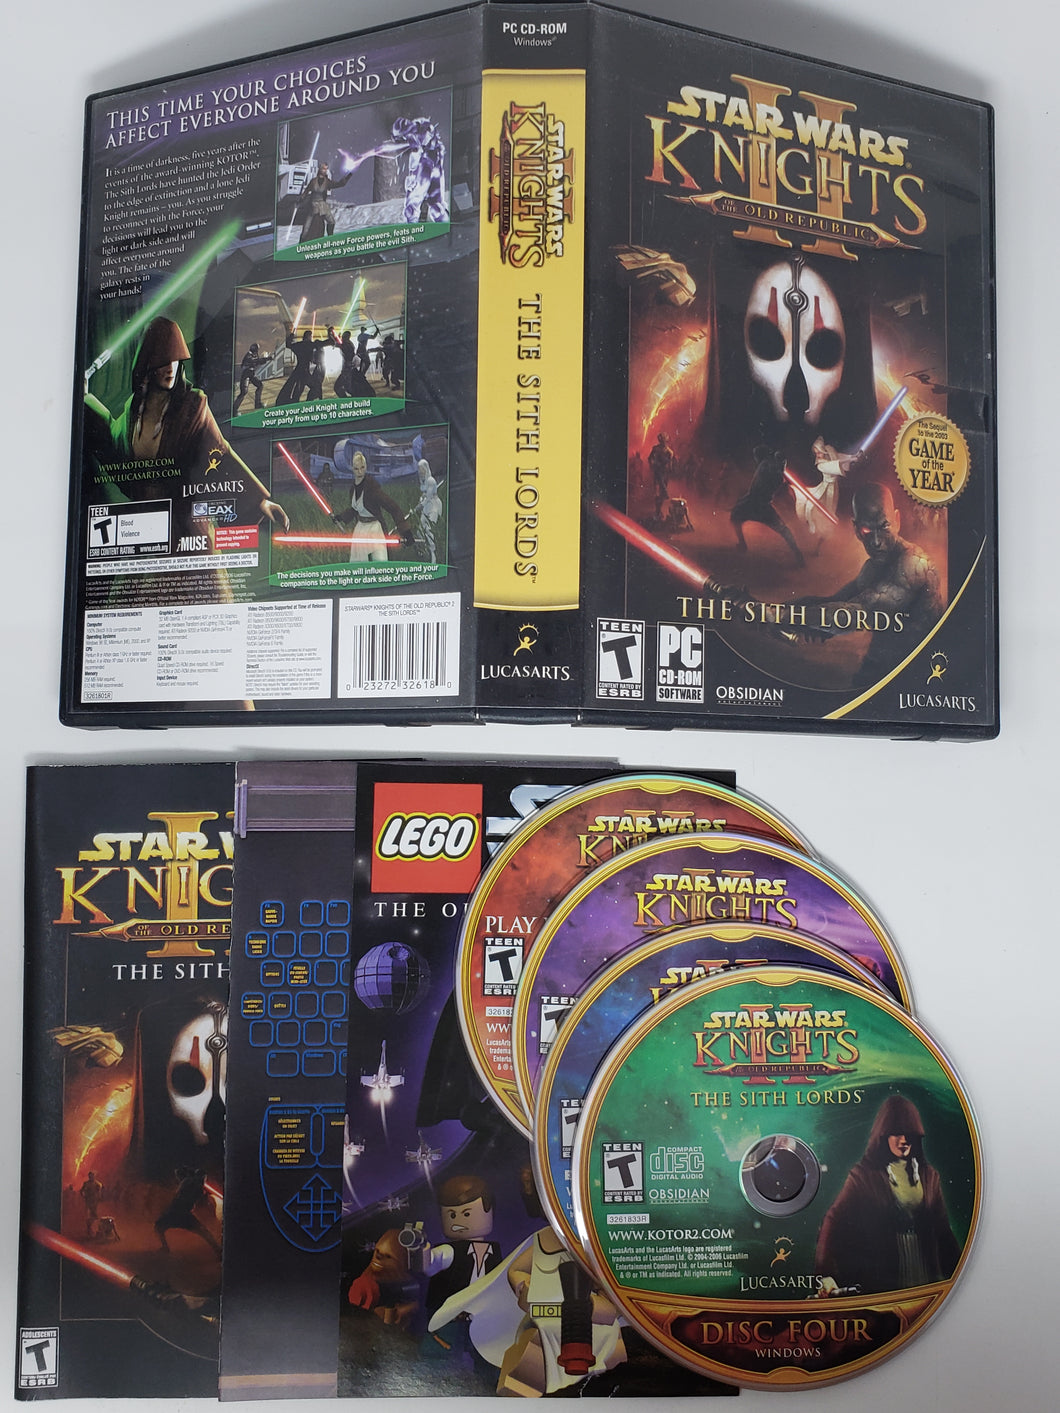 Star Wars Knights of the Old Republic II The Sith Lords - PC Game